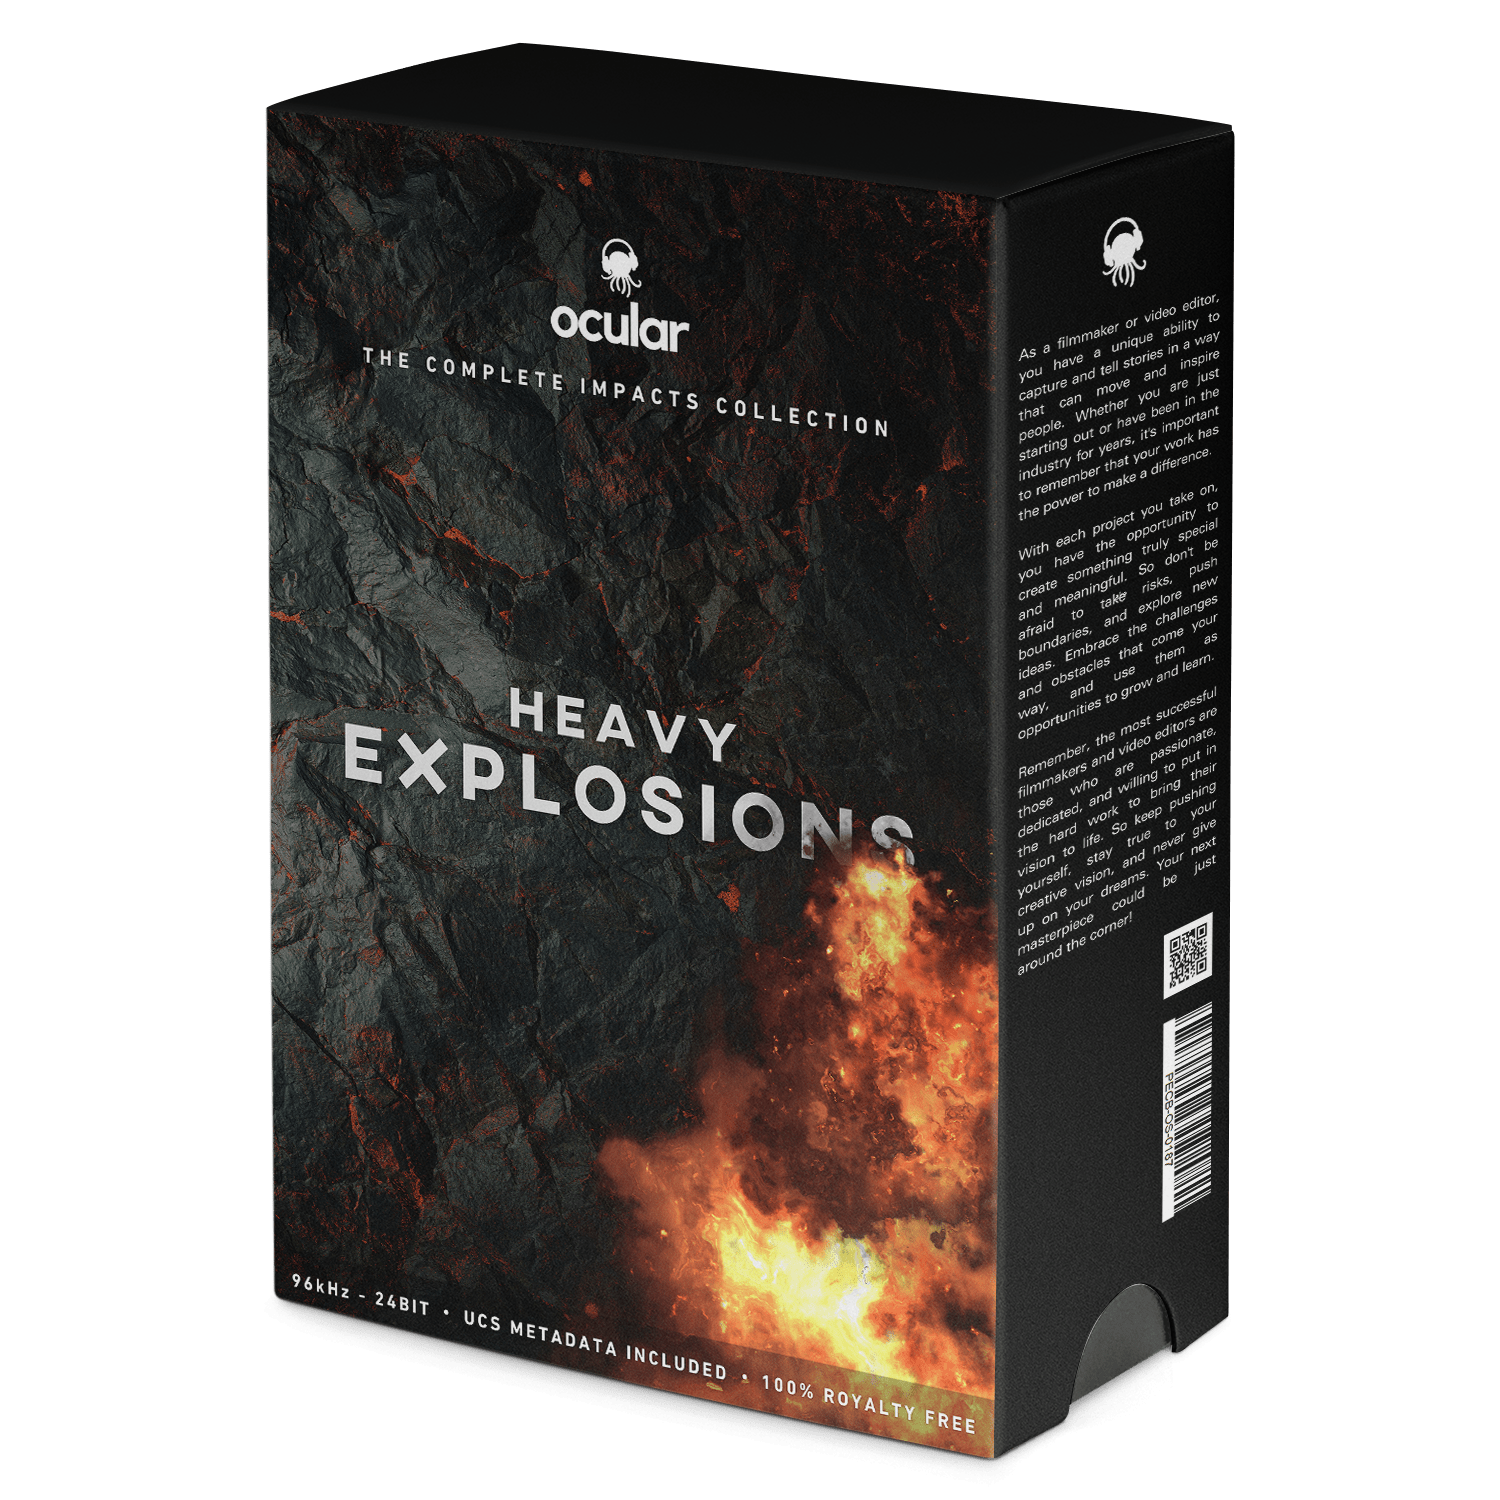 Heavy Explosions Sound FX for video editing.